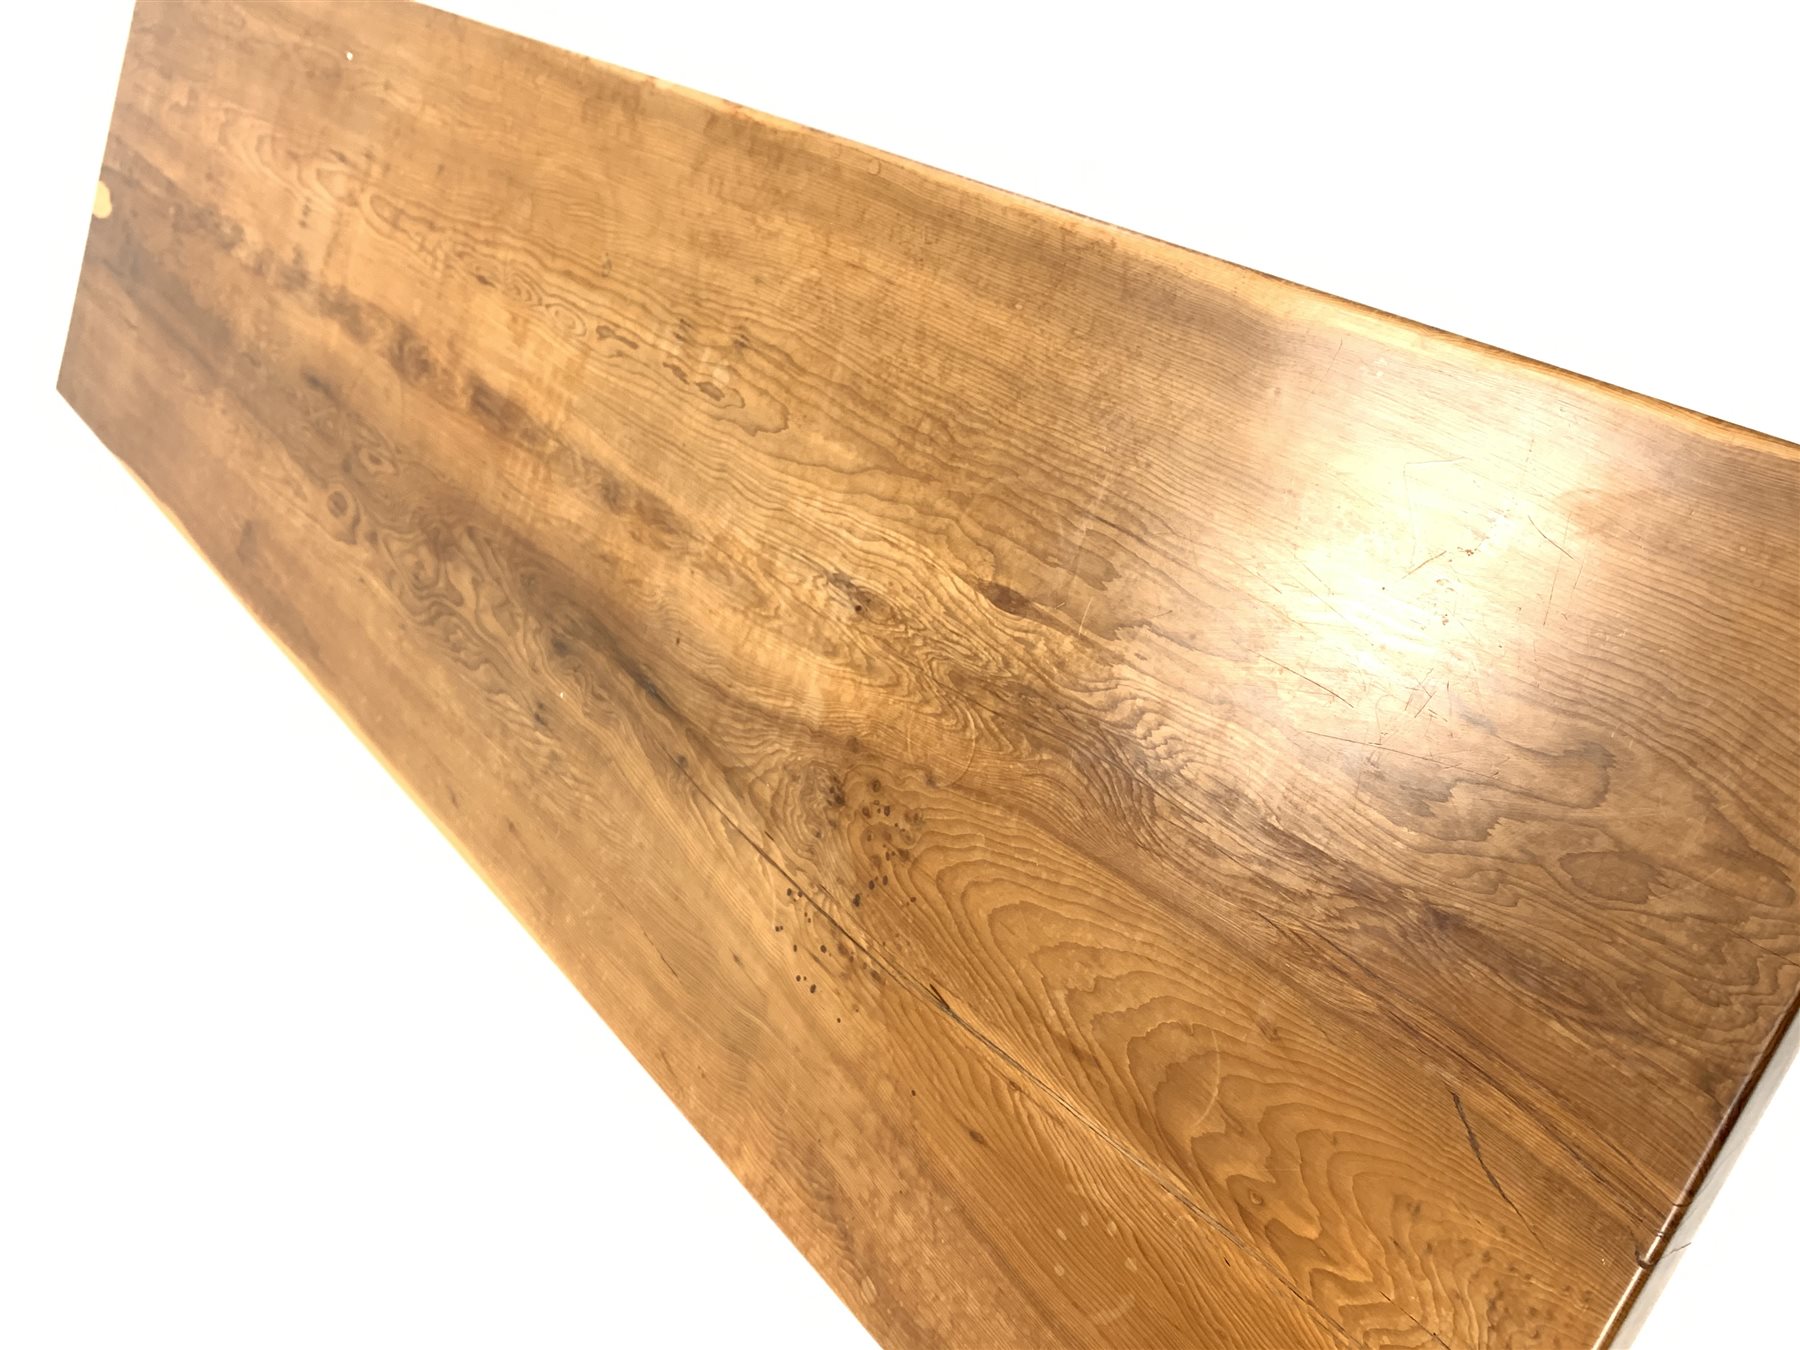 Late 20th century yew wood refectory style table - Image 2 of 3